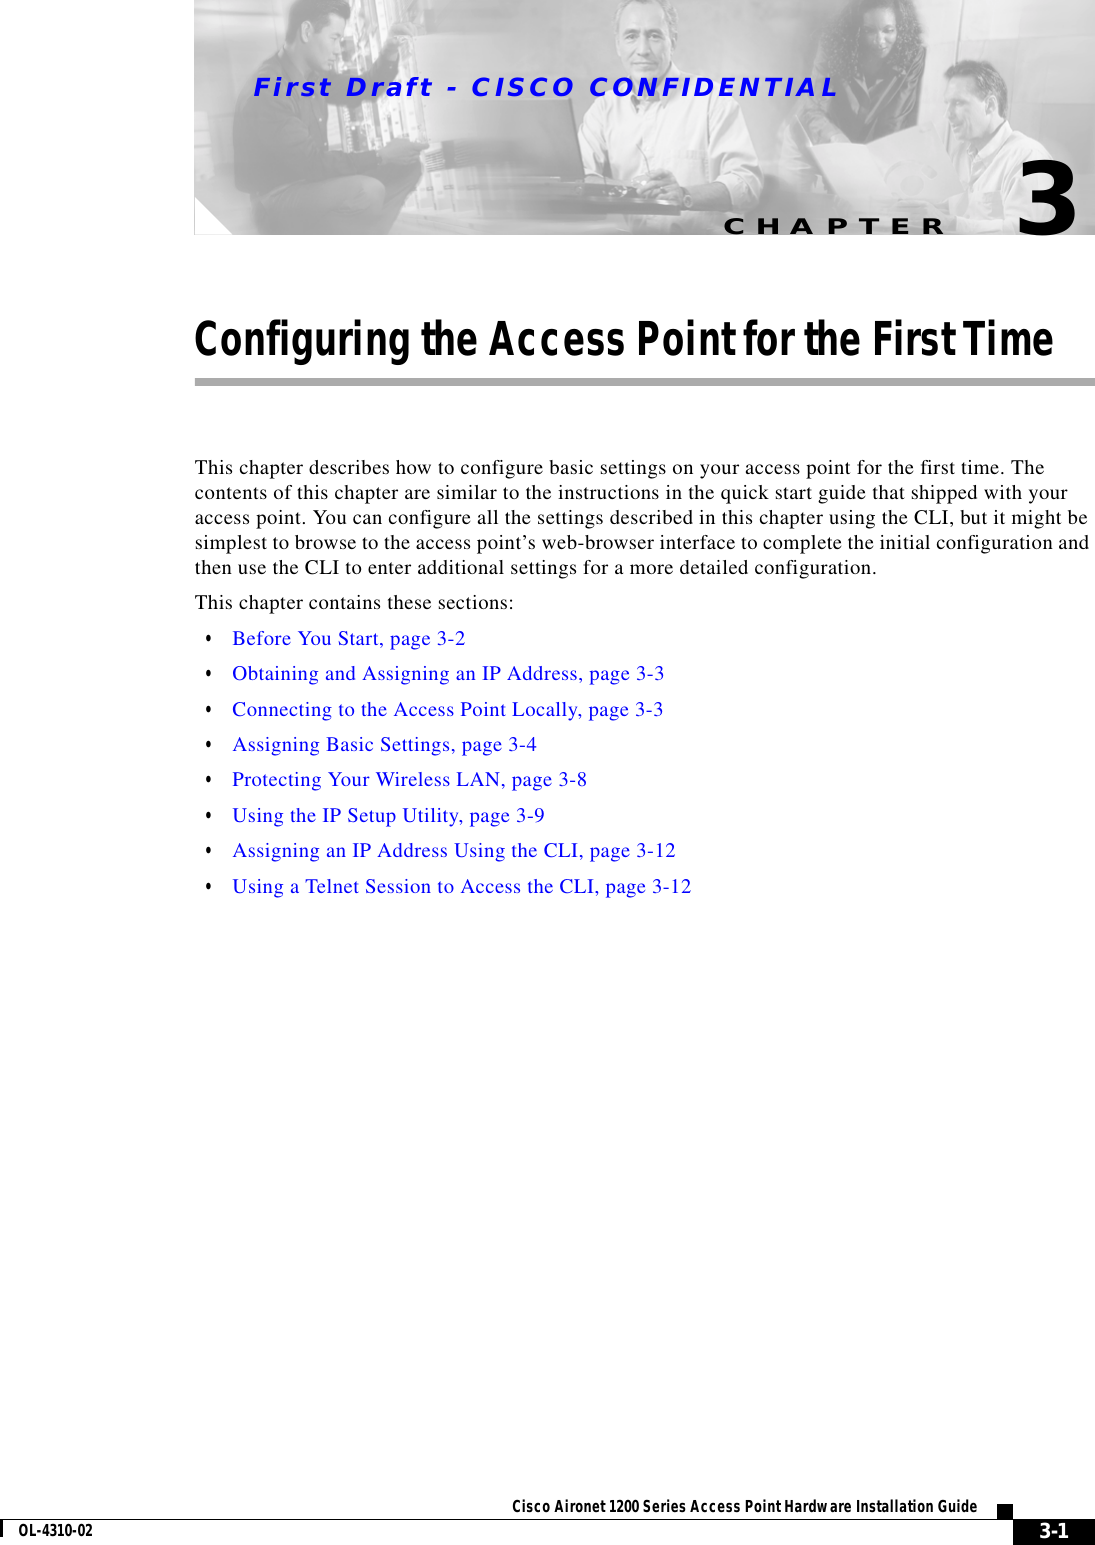 CHAPTERFirst Draft - CISCO CONFIDENTIAL3-1Cisco Aironet 1200 Series Access Point Hardware Installation GuideOL-4310-023Configuring the Access Point for the First TimeThis chapter describes how to configure basic settings on your access point for the first time. The contents of this chapter are similar to the instructions in the quick start guide that shipped with your access point. You can configure all the settings described in this chapter using the CLI, but it might be simplest to browse to the access point’s web-browser interface to complete the initial configuration and then use the CLI to enter additional settings for a more detailed configuration. This chapter contains these sections:•Before You Start, page 3-2•Obtaining and Assigning an IP Address, page 3-3•Connecting to the Access Point Locally, page 3-3•Assigning Basic Settings, page 3-4•Protecting Your Wireless LAN, page 3-8•Using the IP Setup Utility, page 3-9•Assigning an IP Address Using the CLI, page 3-12•Using a Telnet Session to Access the CLI, page 3-12